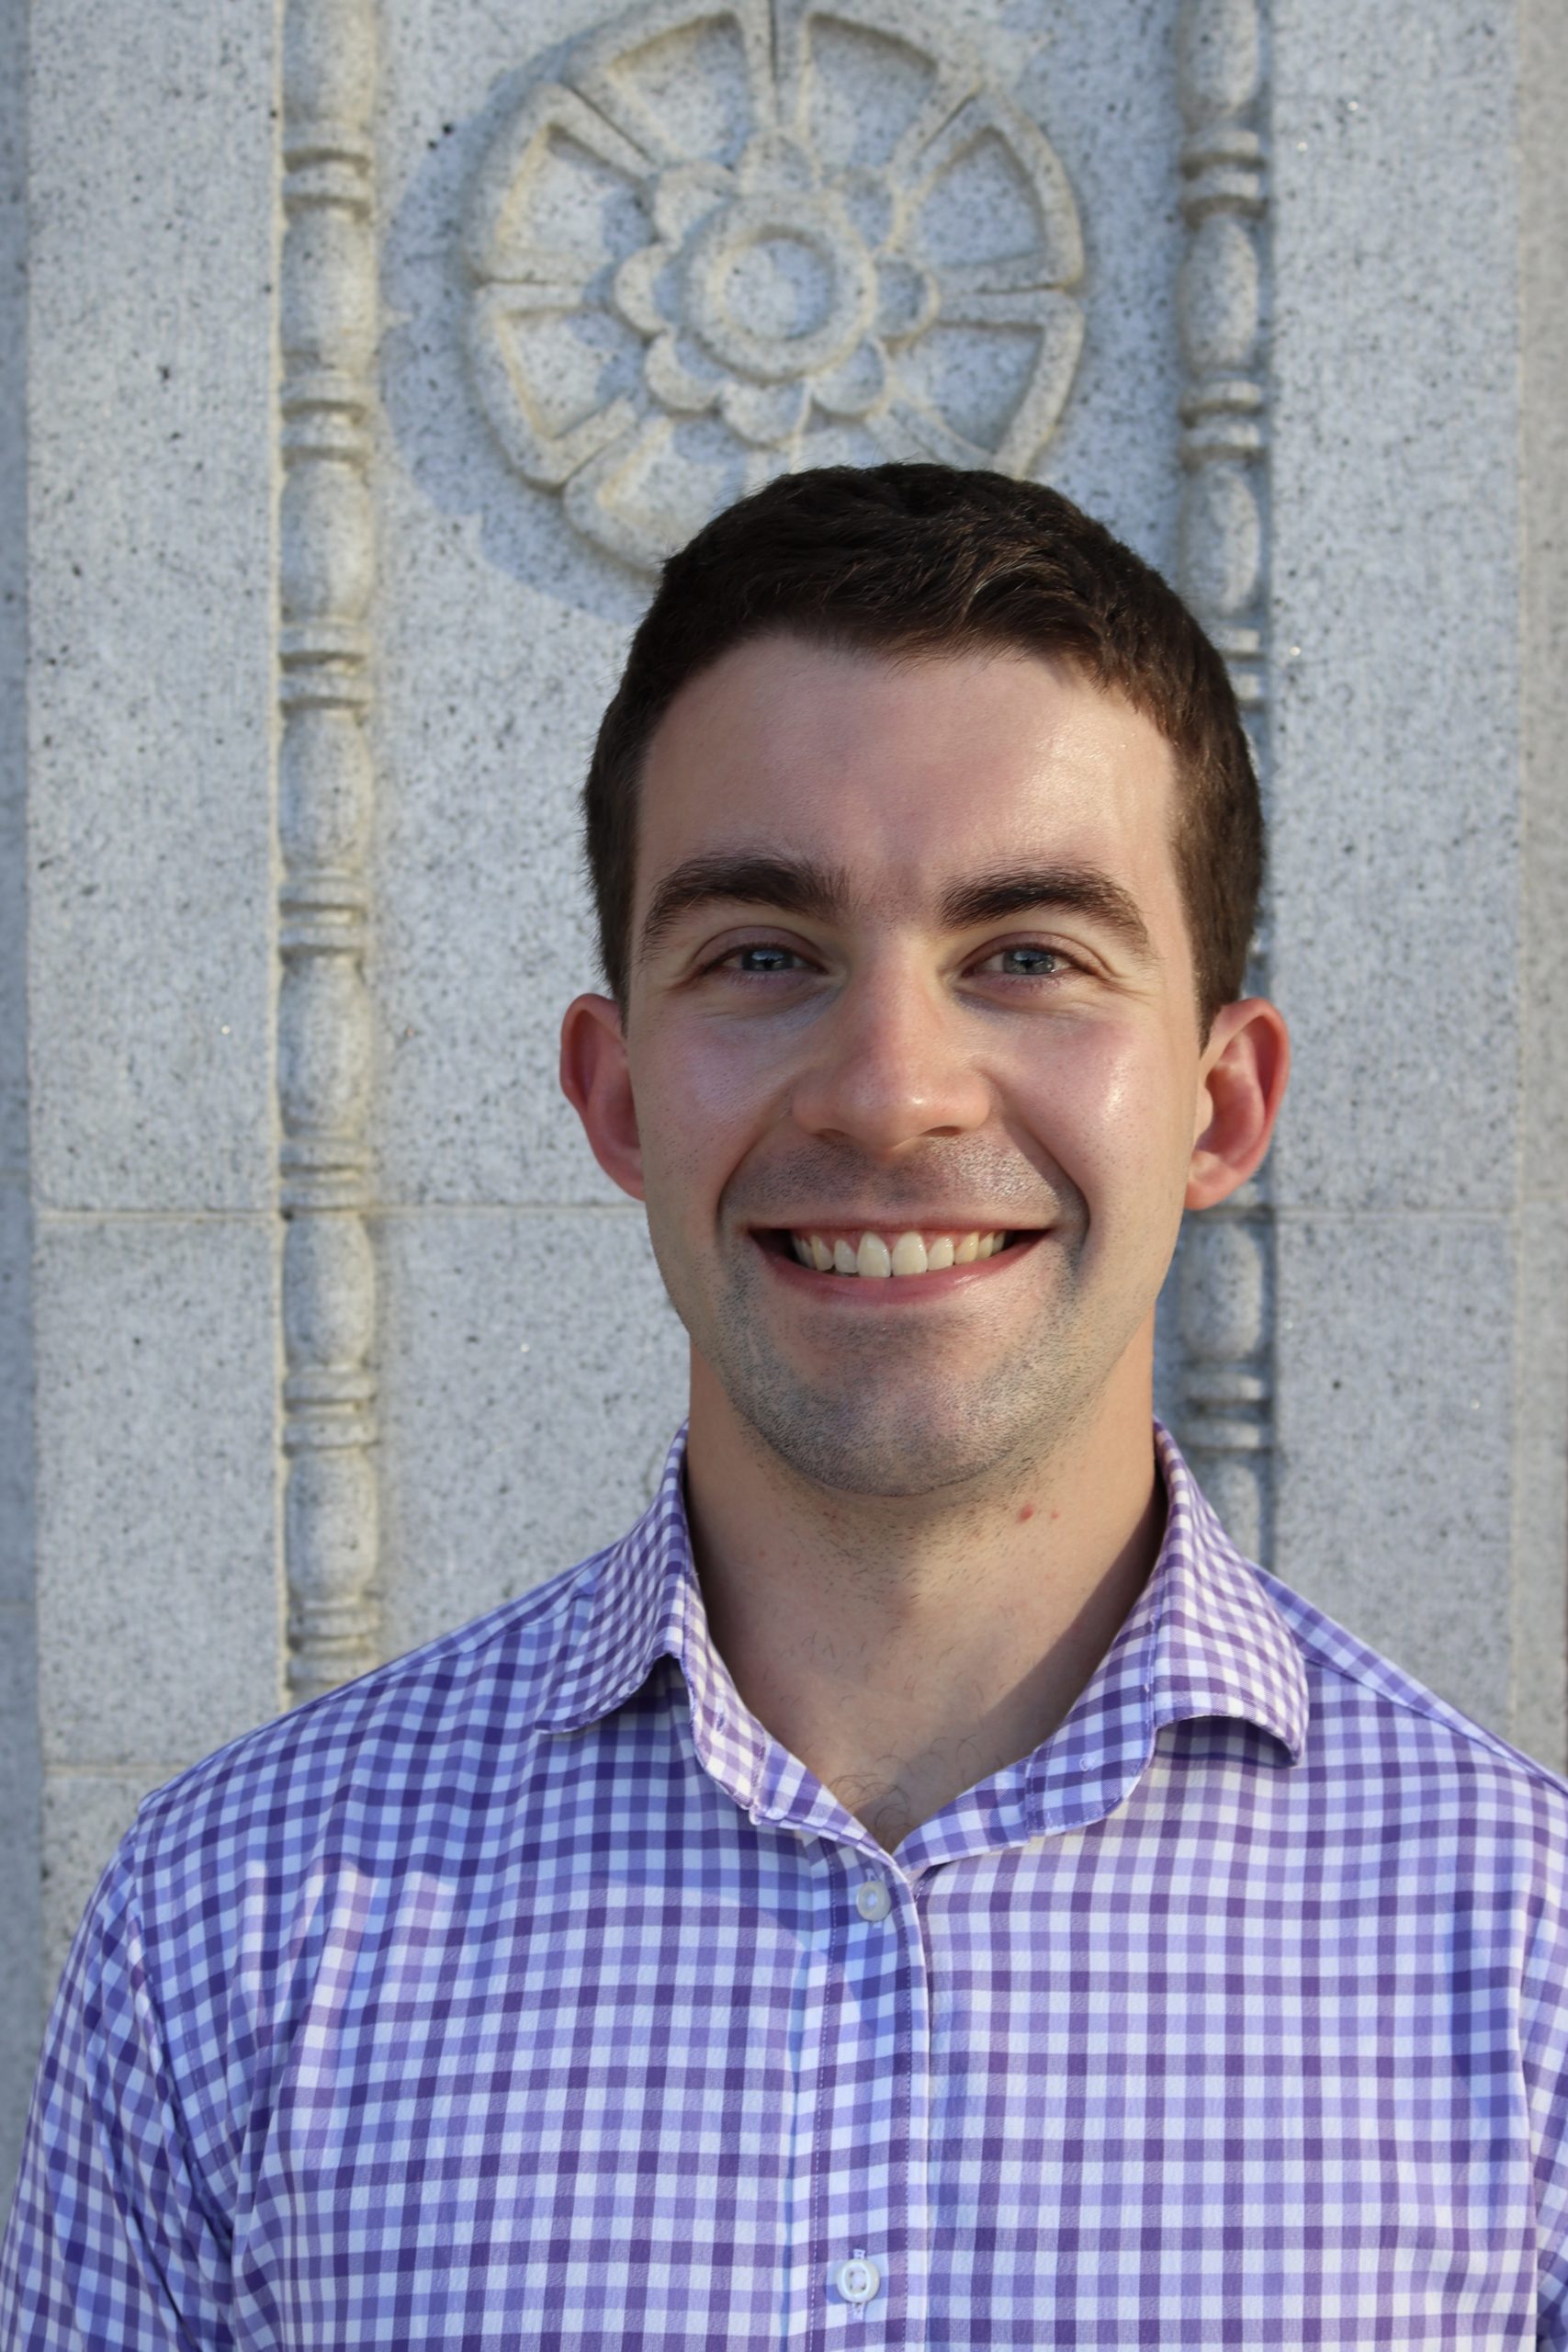 Peter Mason's headshot. Peter is smiling standing in front of a decorative stone structure. Peter is wearing a blue and white collared shirt and has short brown hair.